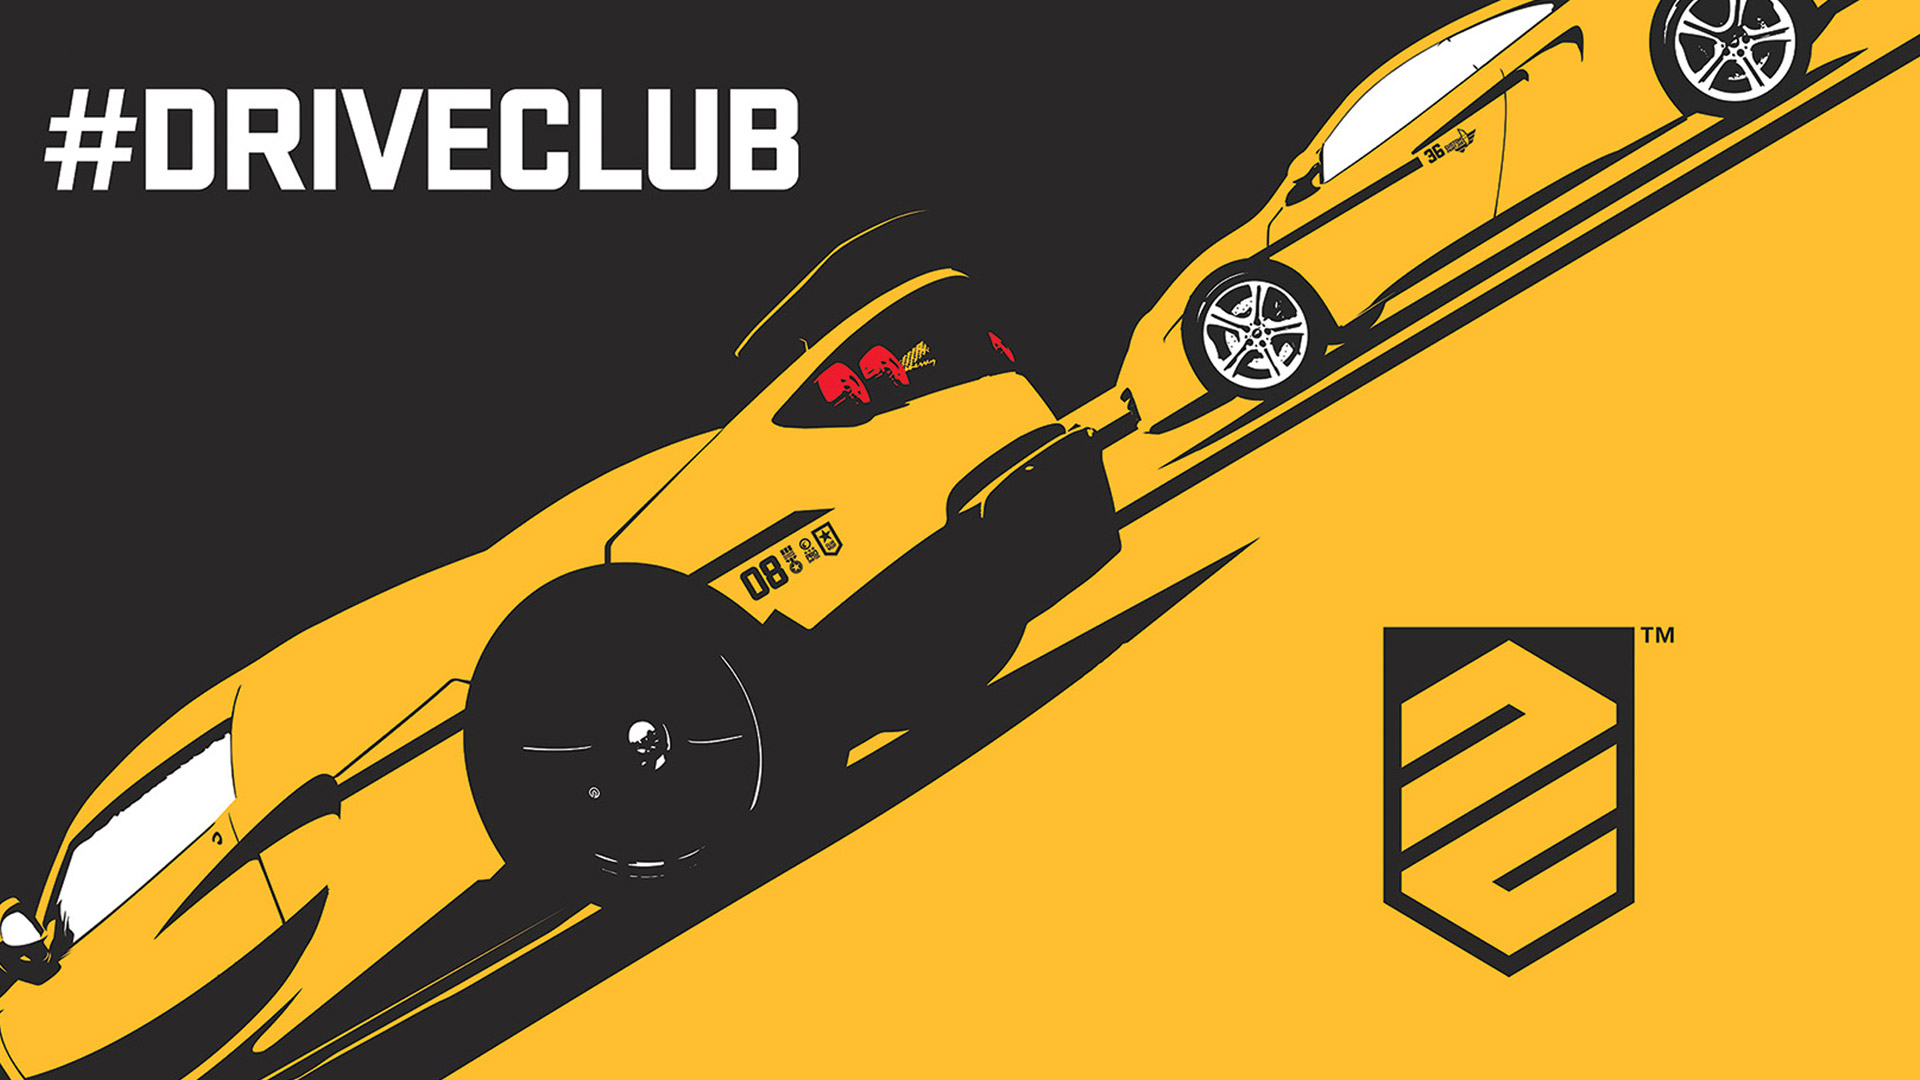 driveclub pc release date